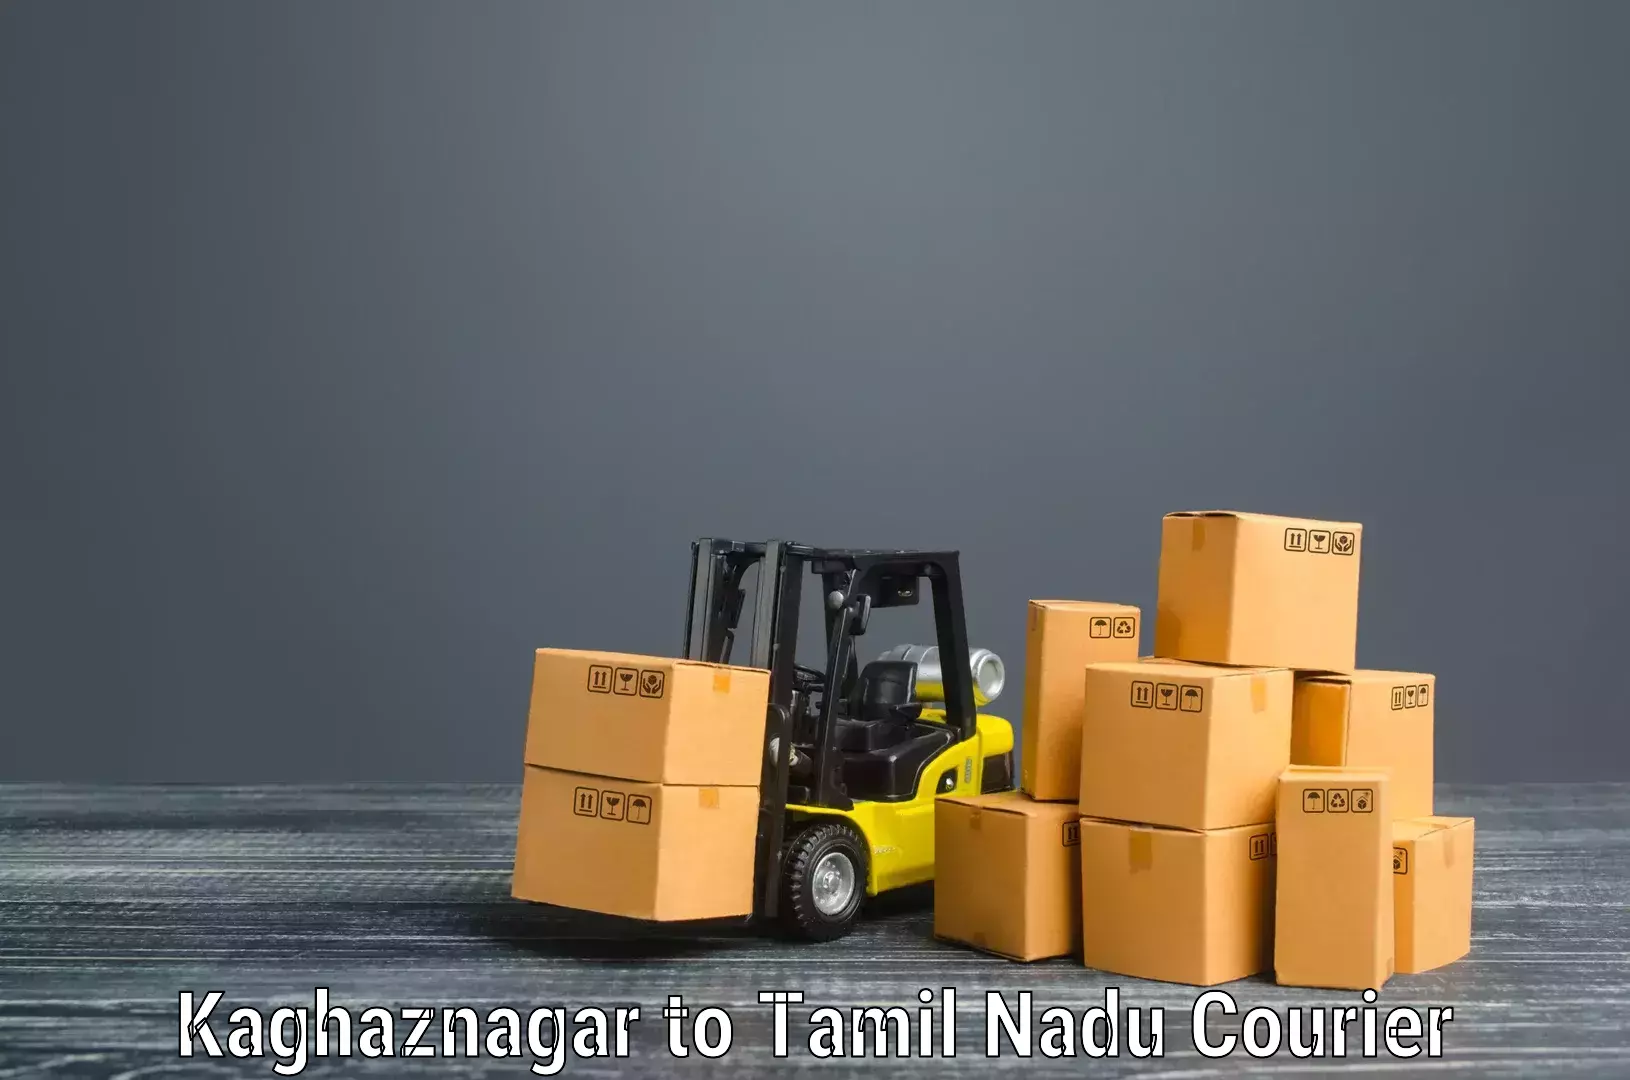 Quality relocation services Kaghaznagar to Dindigul